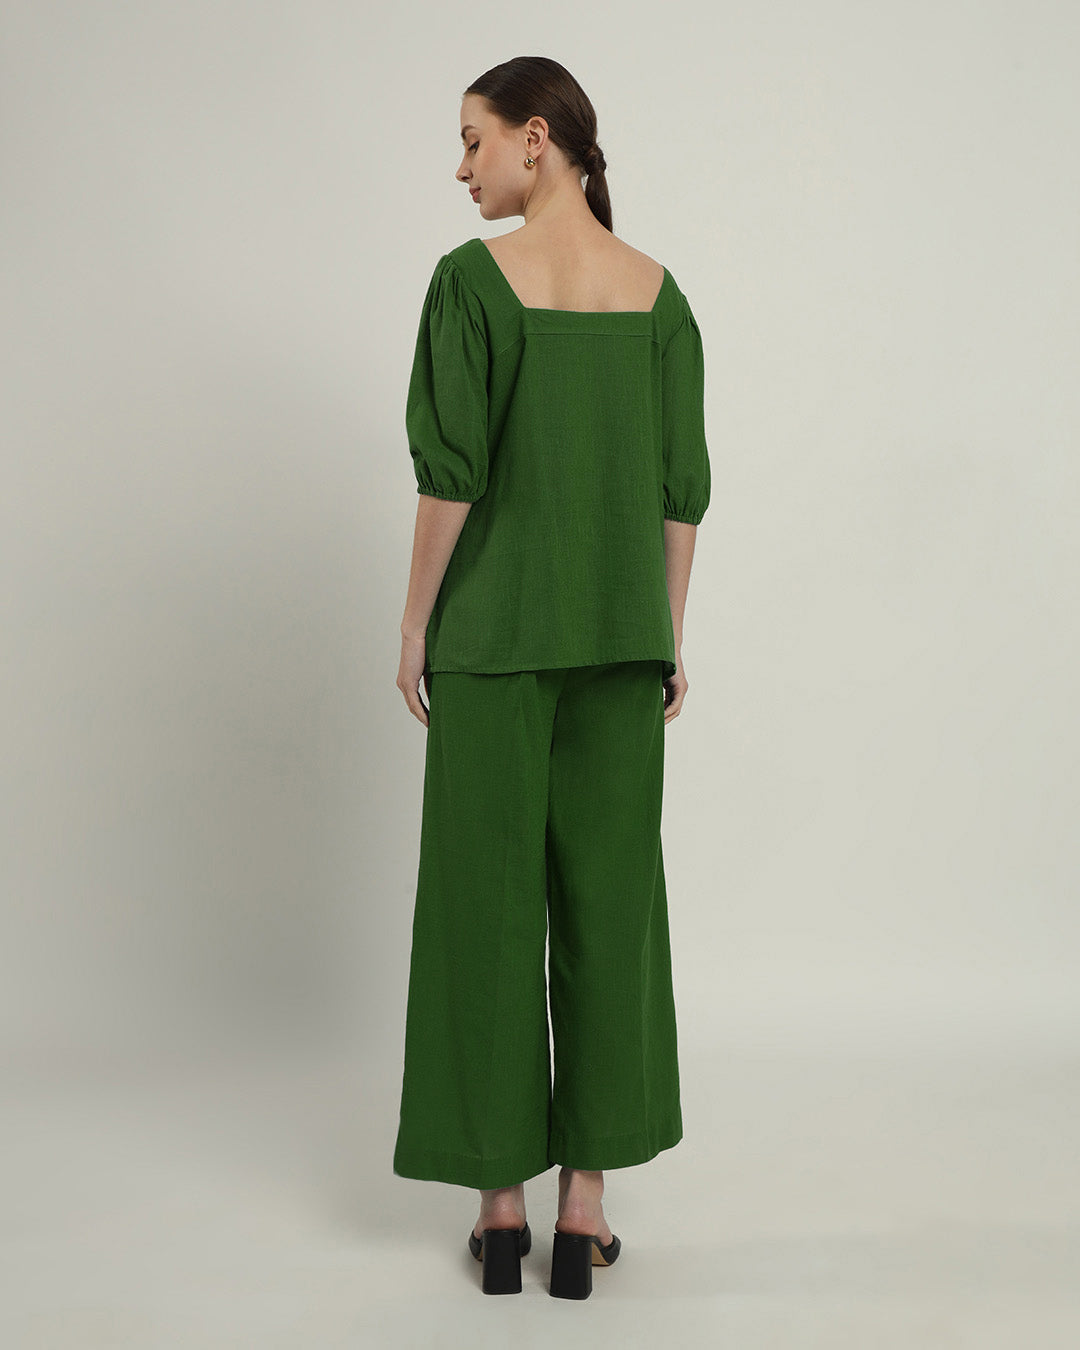 Emerald Urbanite Square Neck Top (Without Bottoms)